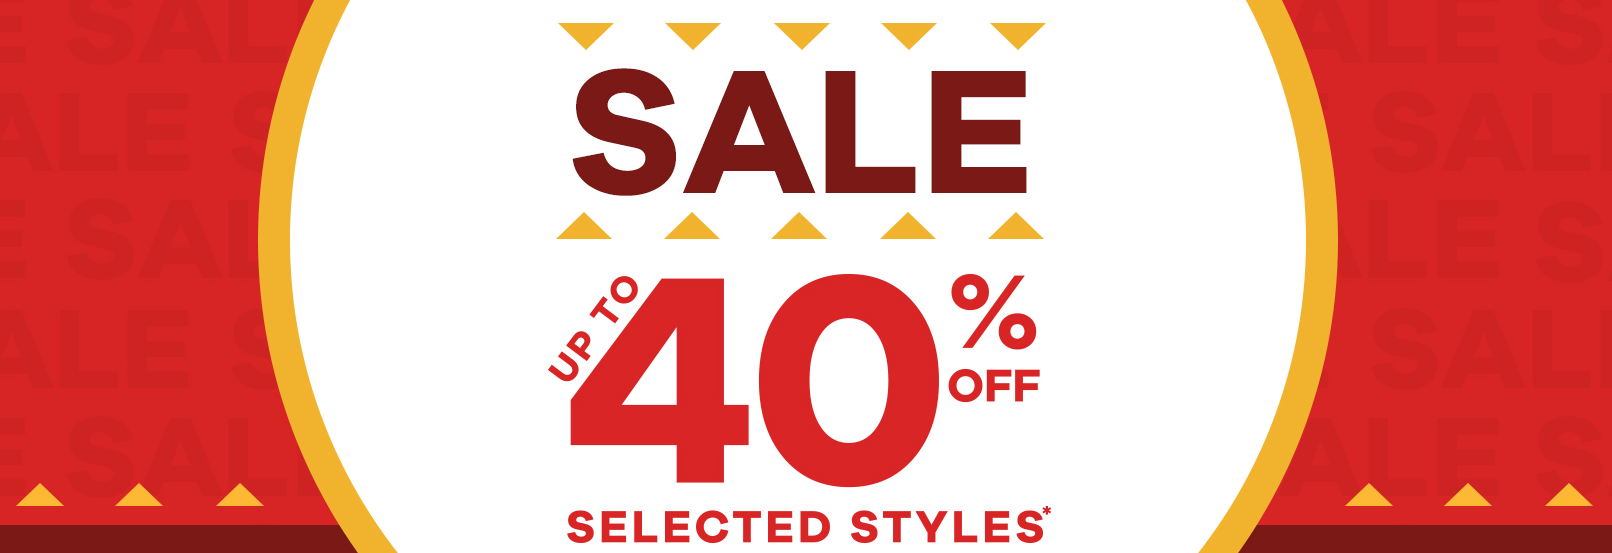 The Athlete's Foot Frenzy sale - Up to 40% OFF selected styles, Free shipping $100+